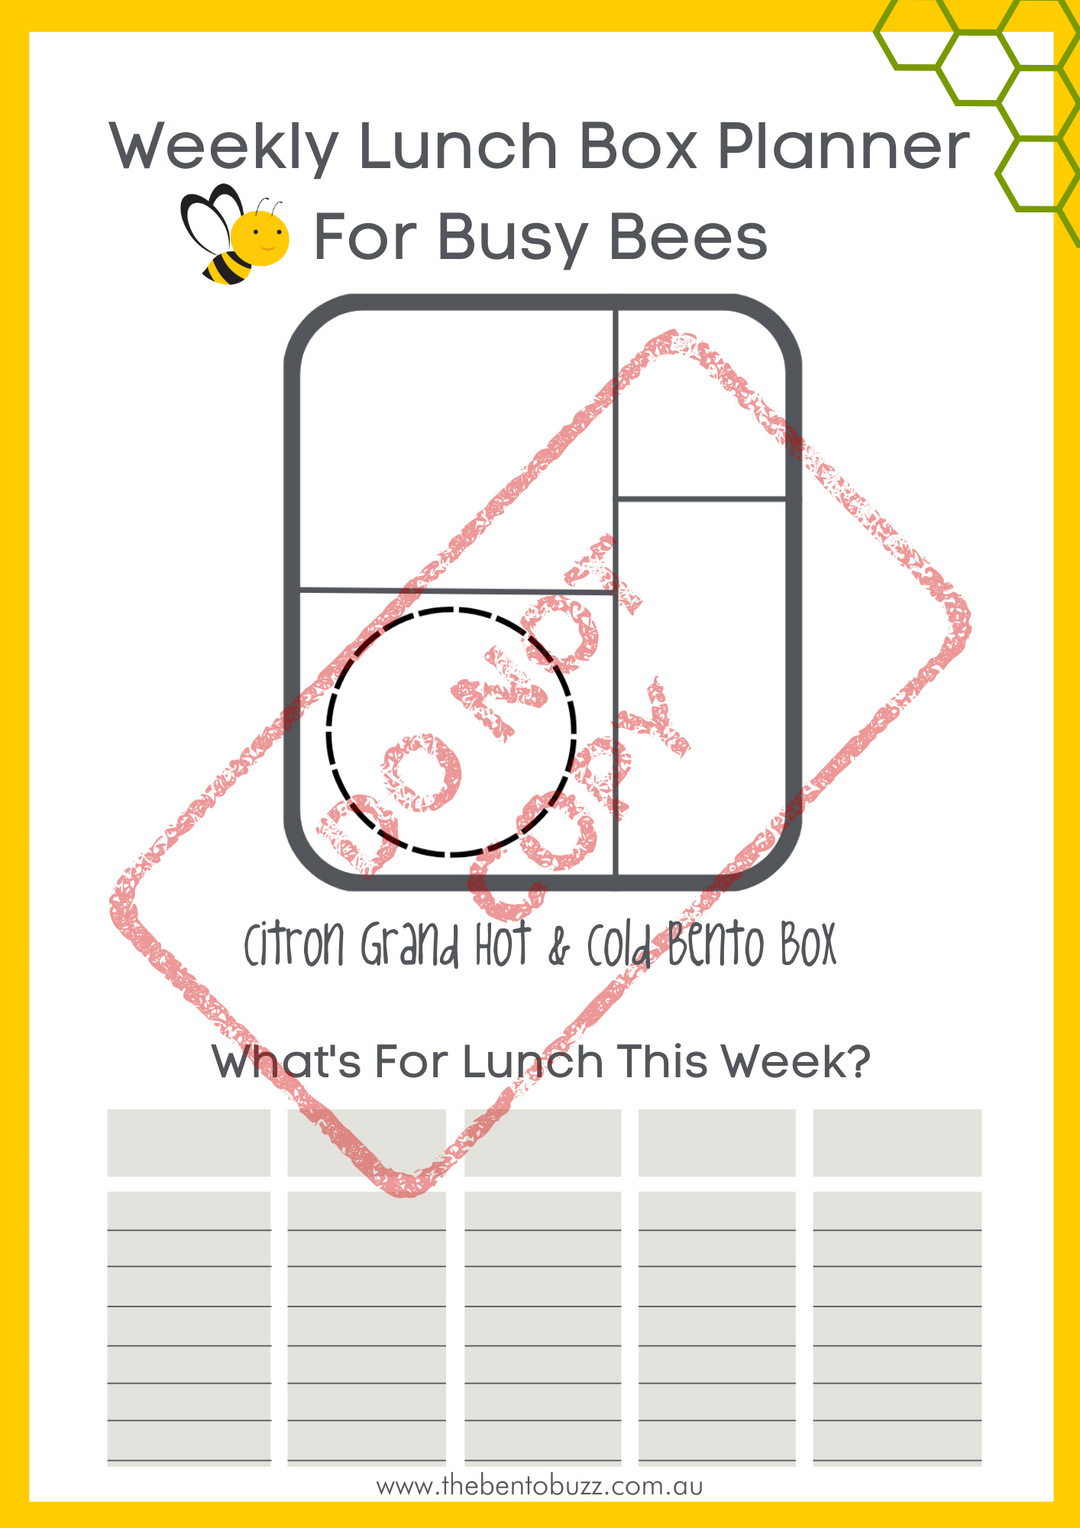 Download & Print Lunch Box Planner - Citron Grand